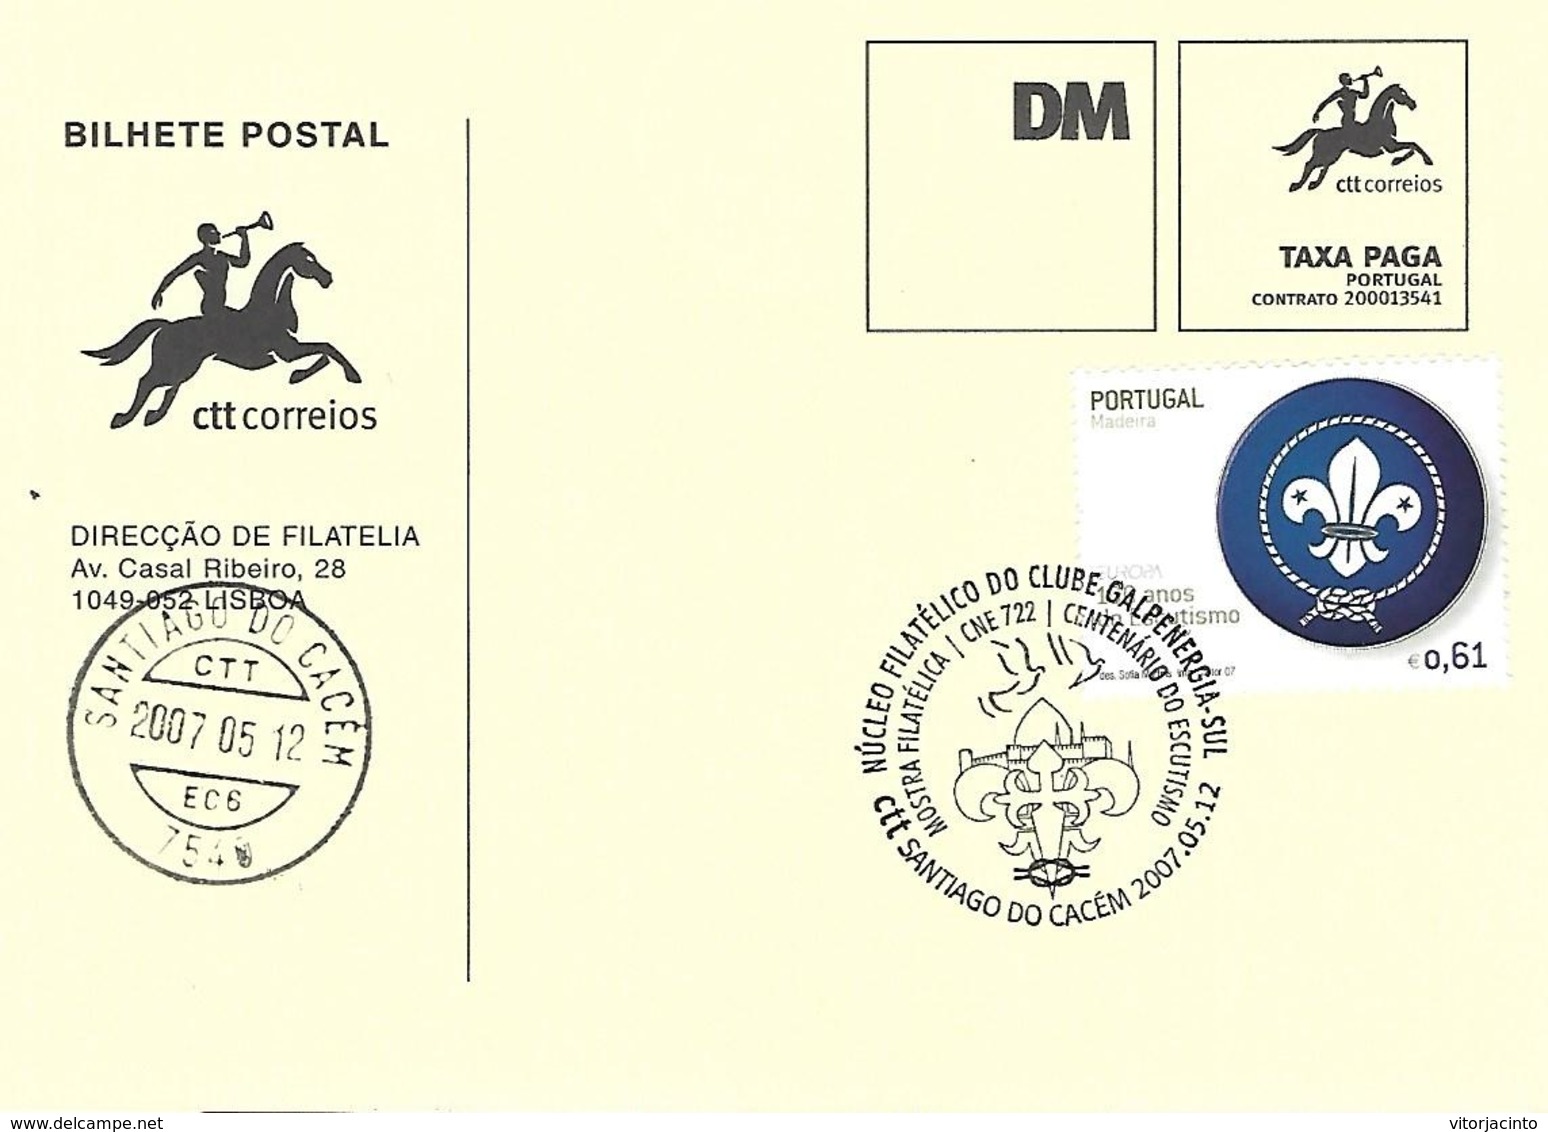 PORTUGAL - PAP - Postmark - Scouting Centenary 2007 (Direct Mail - Official Postcard Announcement) - Unclassified